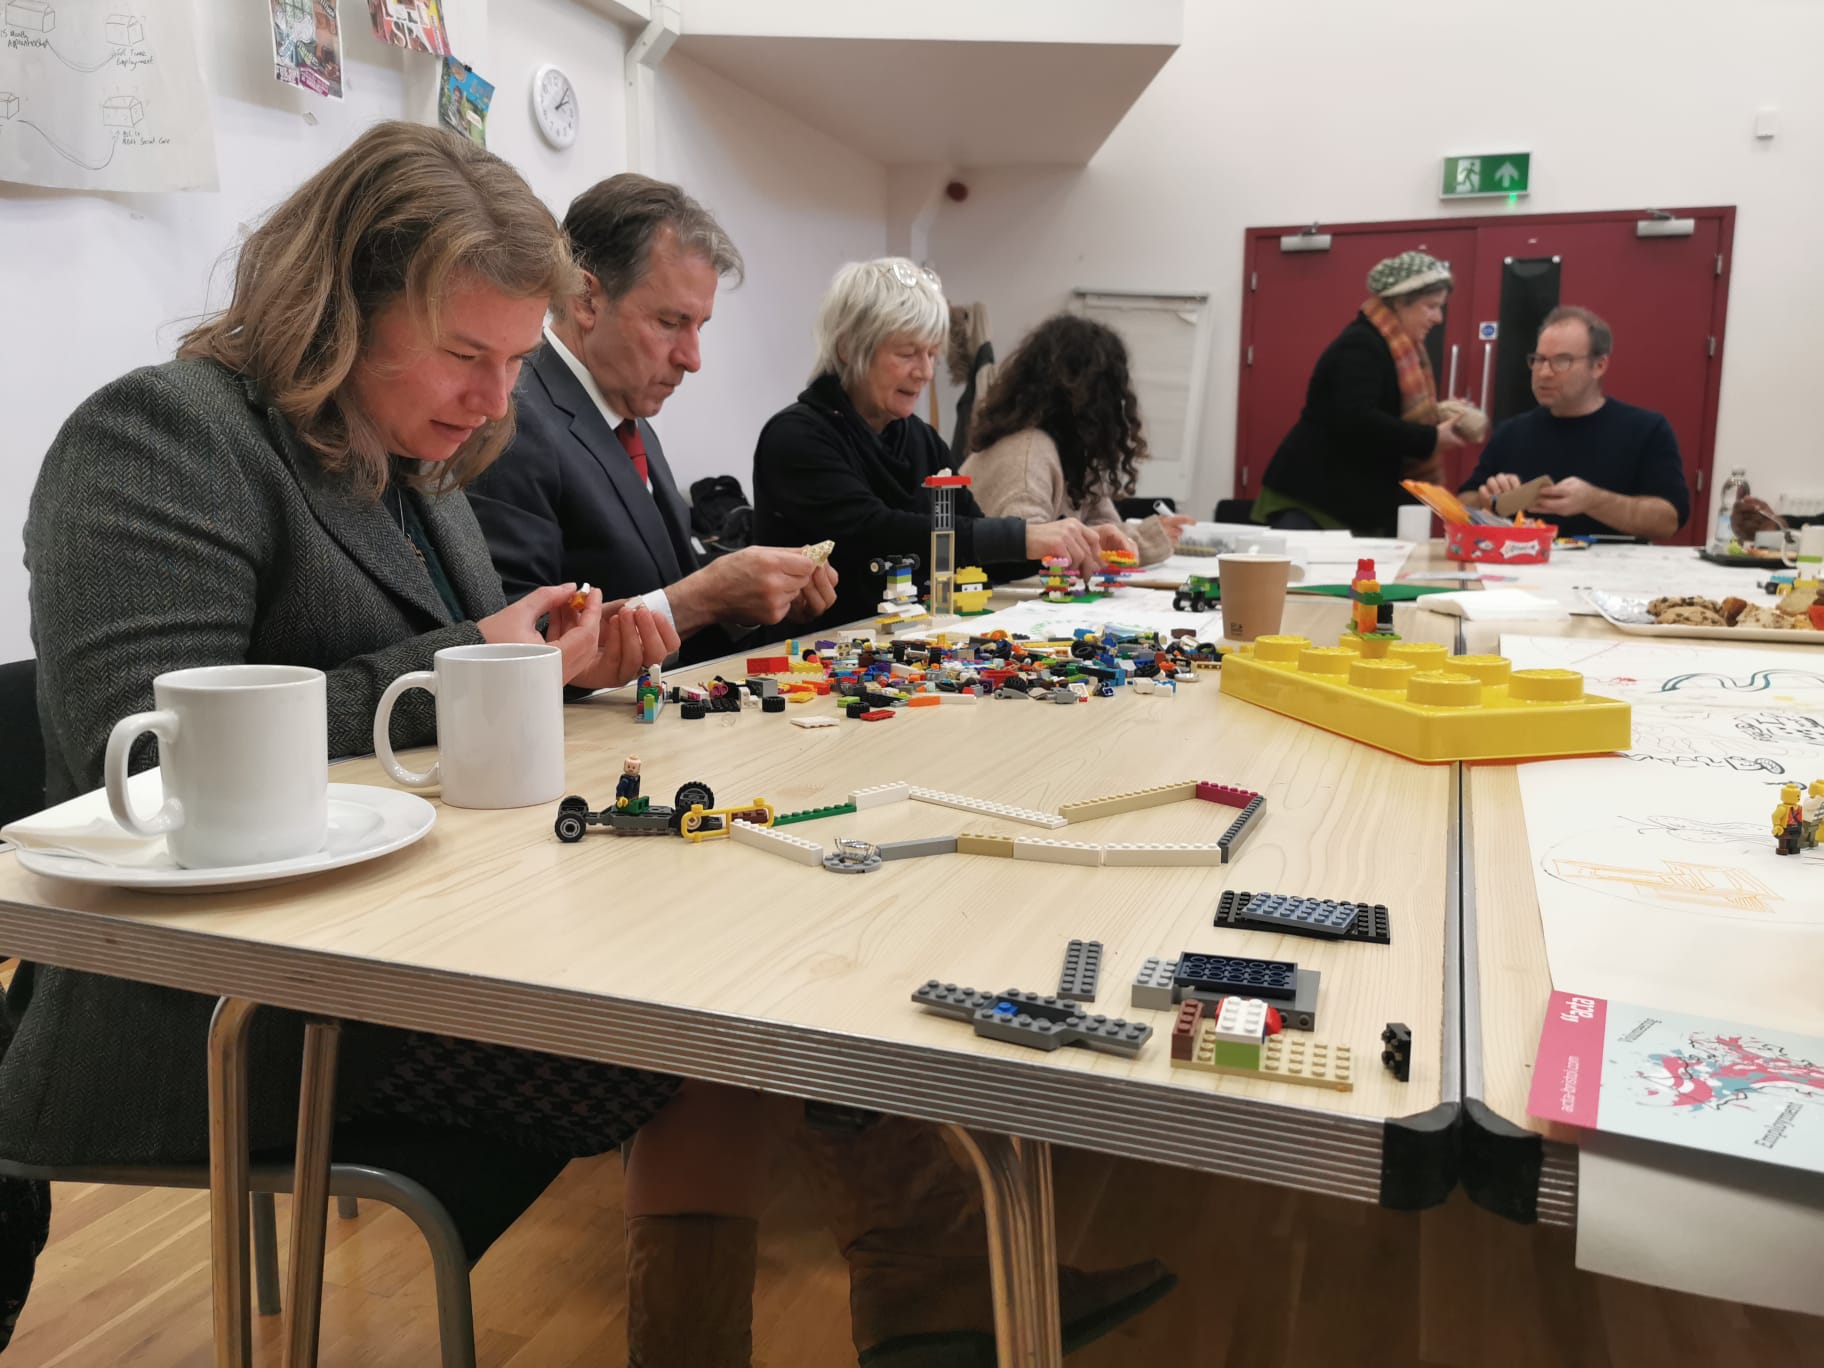 Five people sit at a big table, using lego bricks to help communicate their ideas